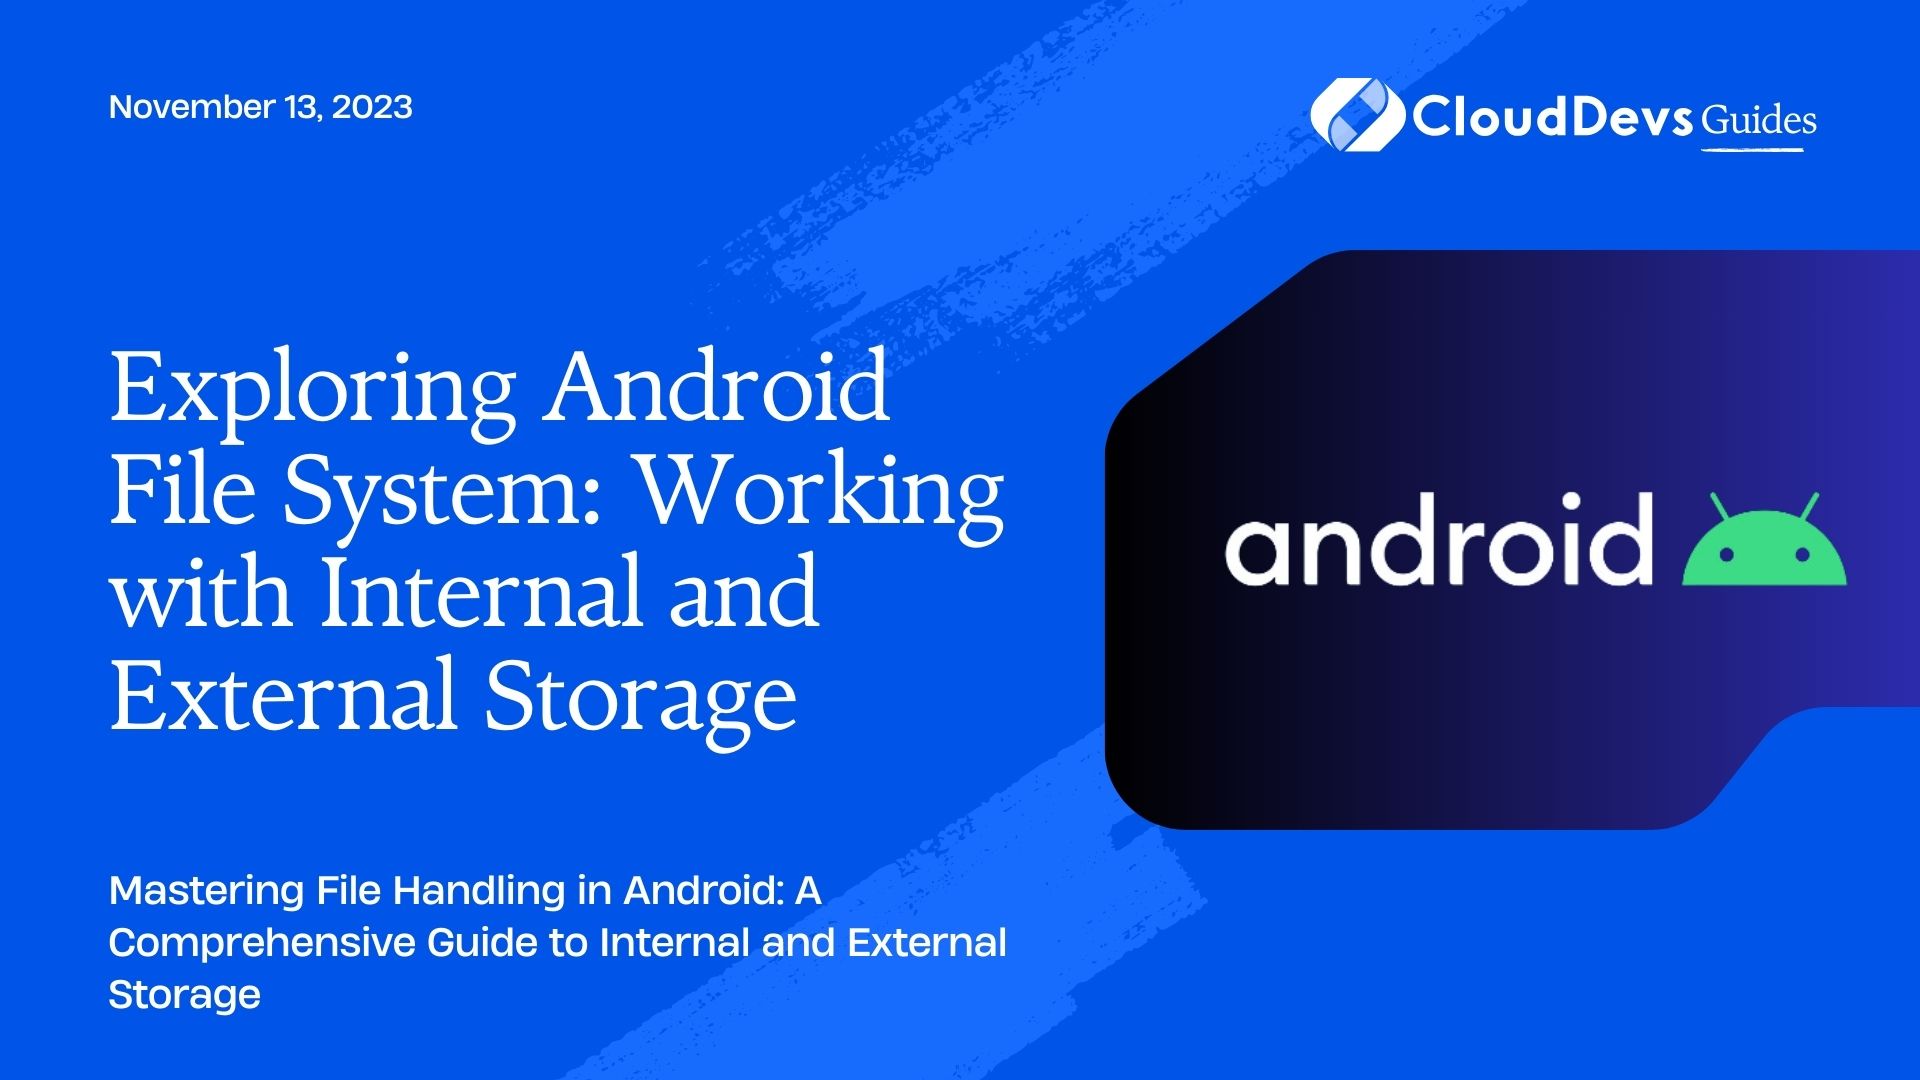 Exploring Android File System: Working with Internal and External Storage